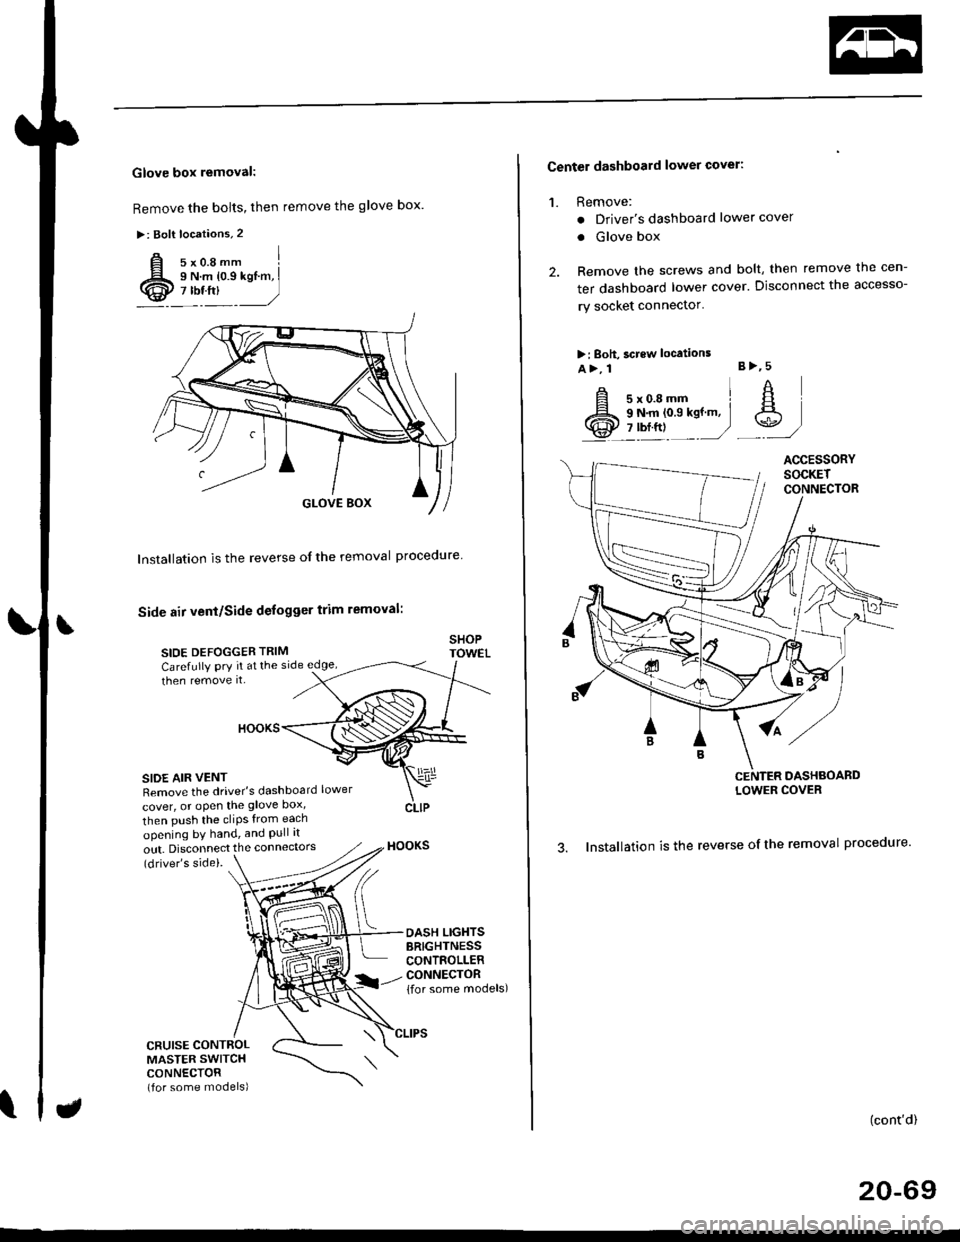 HONDA CIVIC 1999 6.G Workshop Manual Glove box removal:
Remove the bolts, then remove the glove box.
>: Bolt locations,2
Installation is the reverse of the removal proceoure
Side air vent/Side defogger trim removal:
SIOE DEFOGGER TRIMSHO